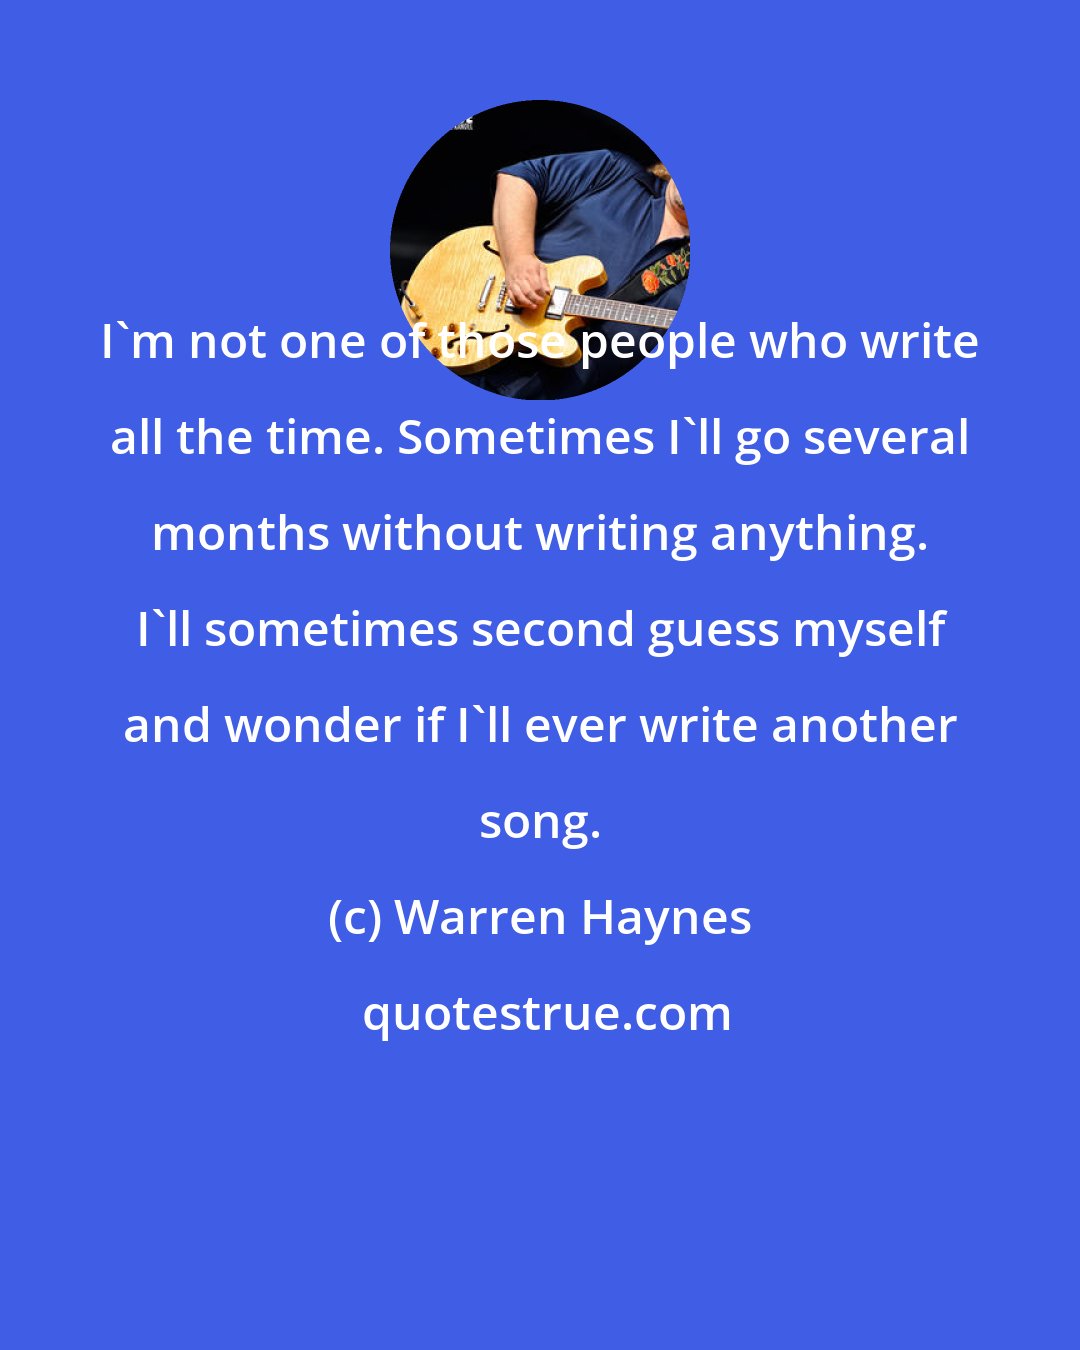 Warren Haynes: I'm not one of those people who write all the time. Sometimes I'll go several months without writing anything. I'll sometimes second guess myself and wonder if I'll ever write another song.